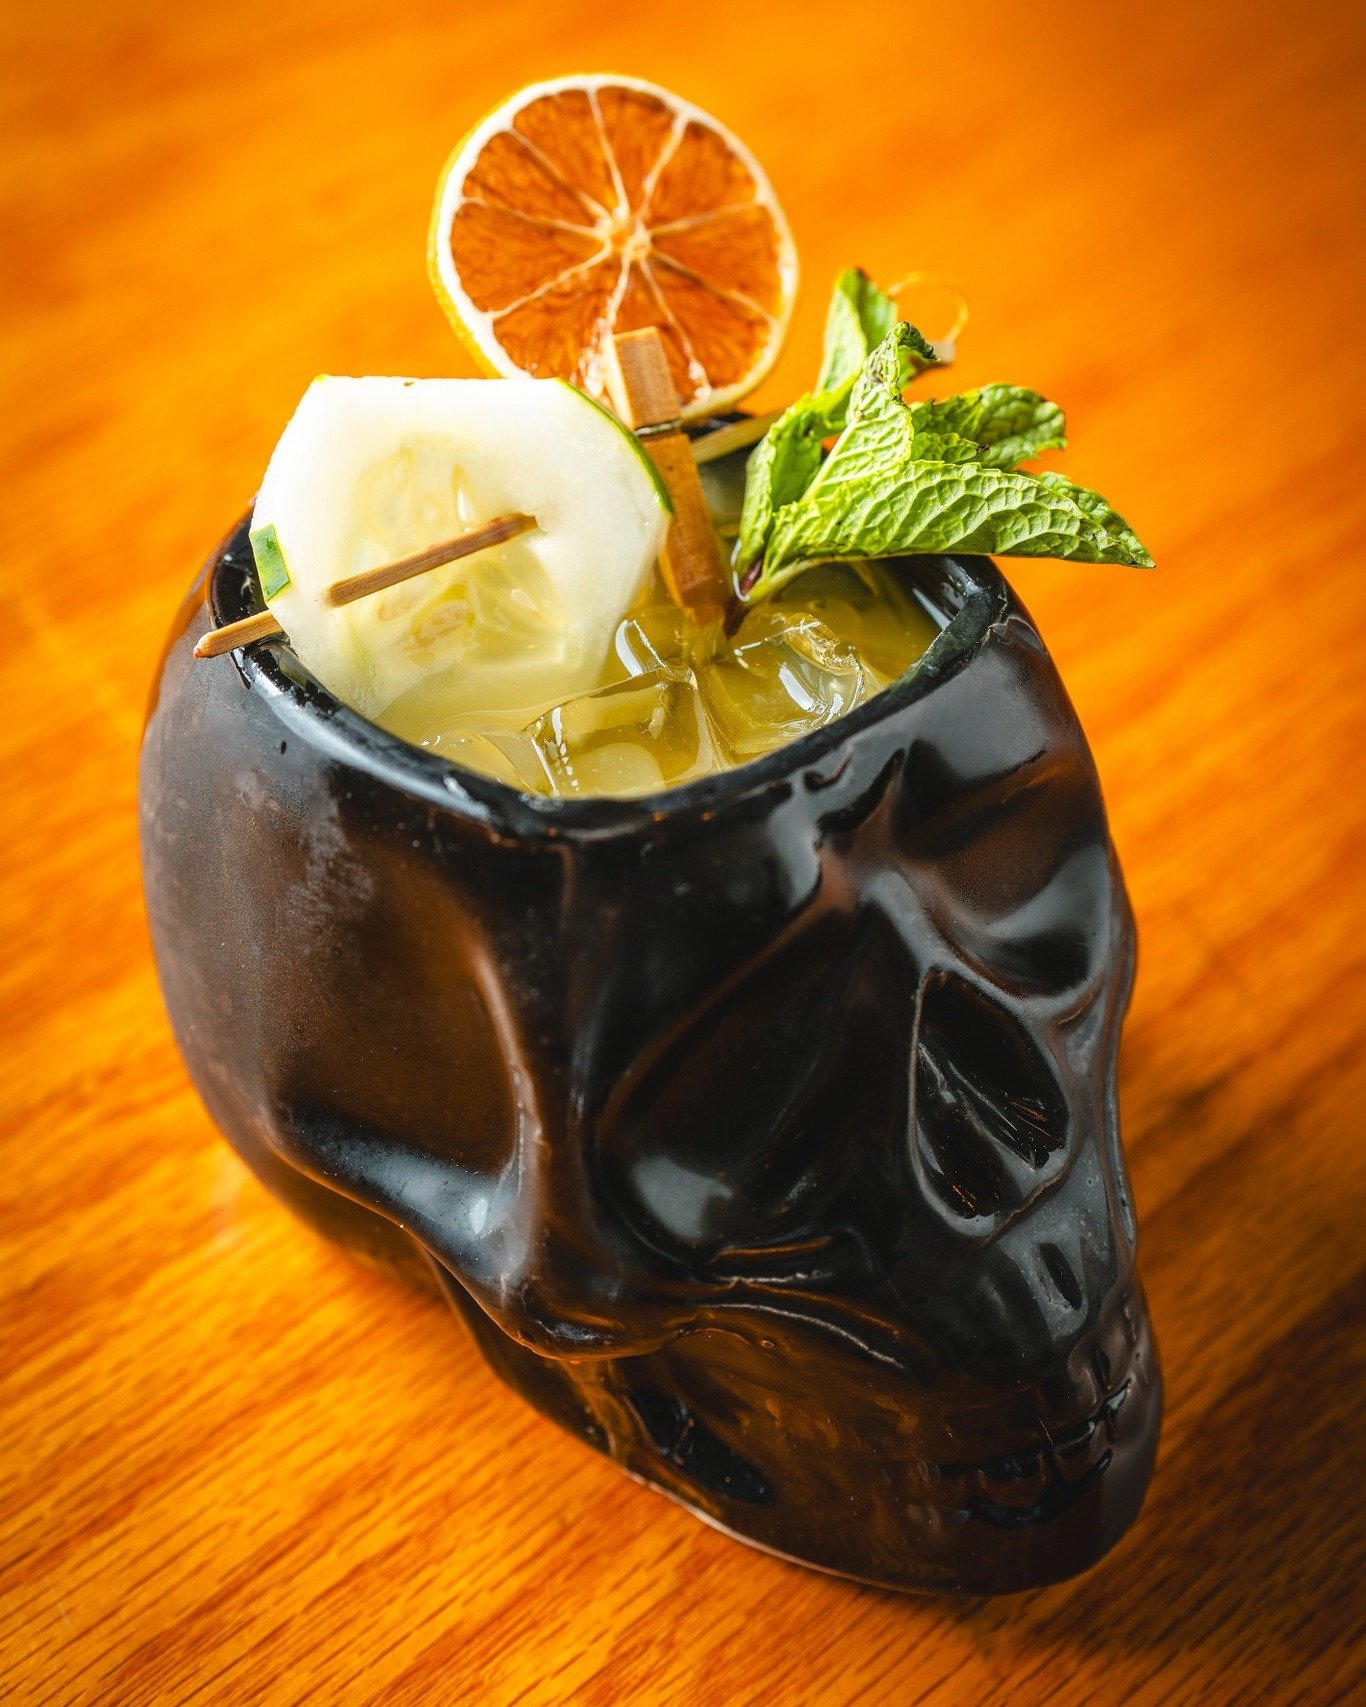 Inhale the enchantment, exhale the stress with our delightful drinks 🍸🍹😍

Find us at
📍Whiteville, NC
📍Zebulon, NC
📍Elizabethtown, NC
📍Shallotte, NC

#sanjosenc #mexicanfood #ncrestaurants #drinks #drinksdrinksdrinks #cocktails #cocktailtime